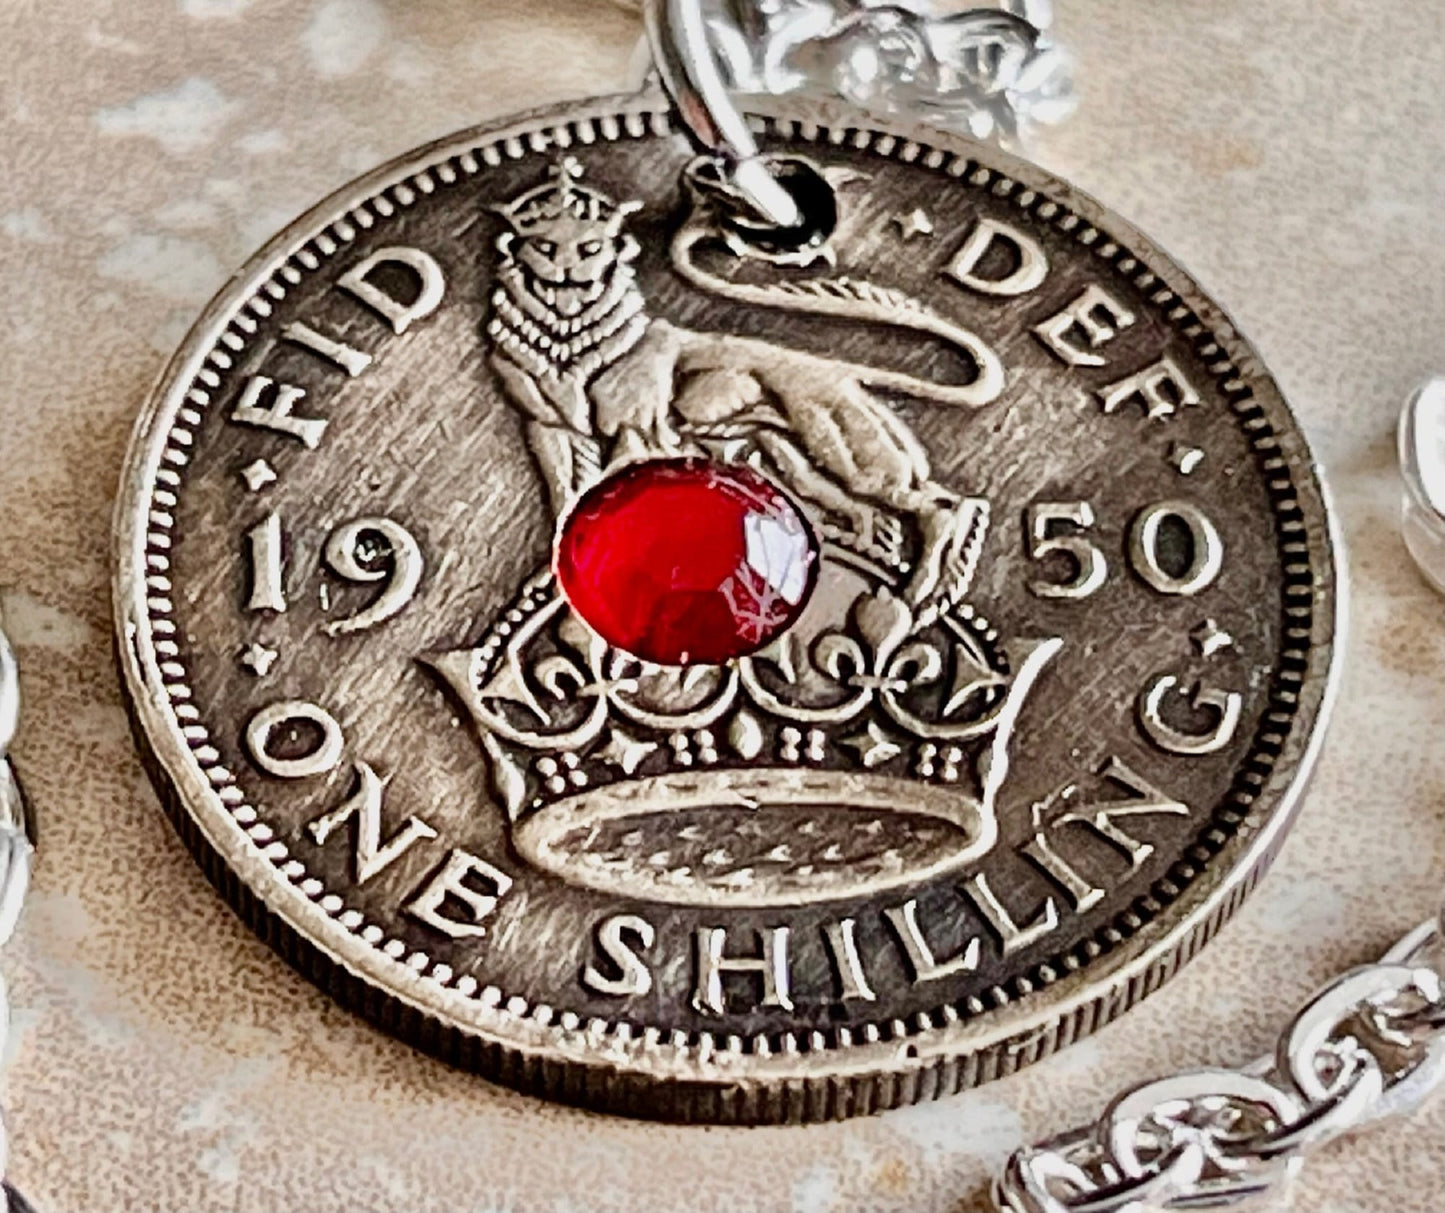 Britain Coin Pendant One Shilling Rhinestone Jewelry England Necklace Charm Friend Coin Charm Gift For Him, Her, Coin Collector, World Coins